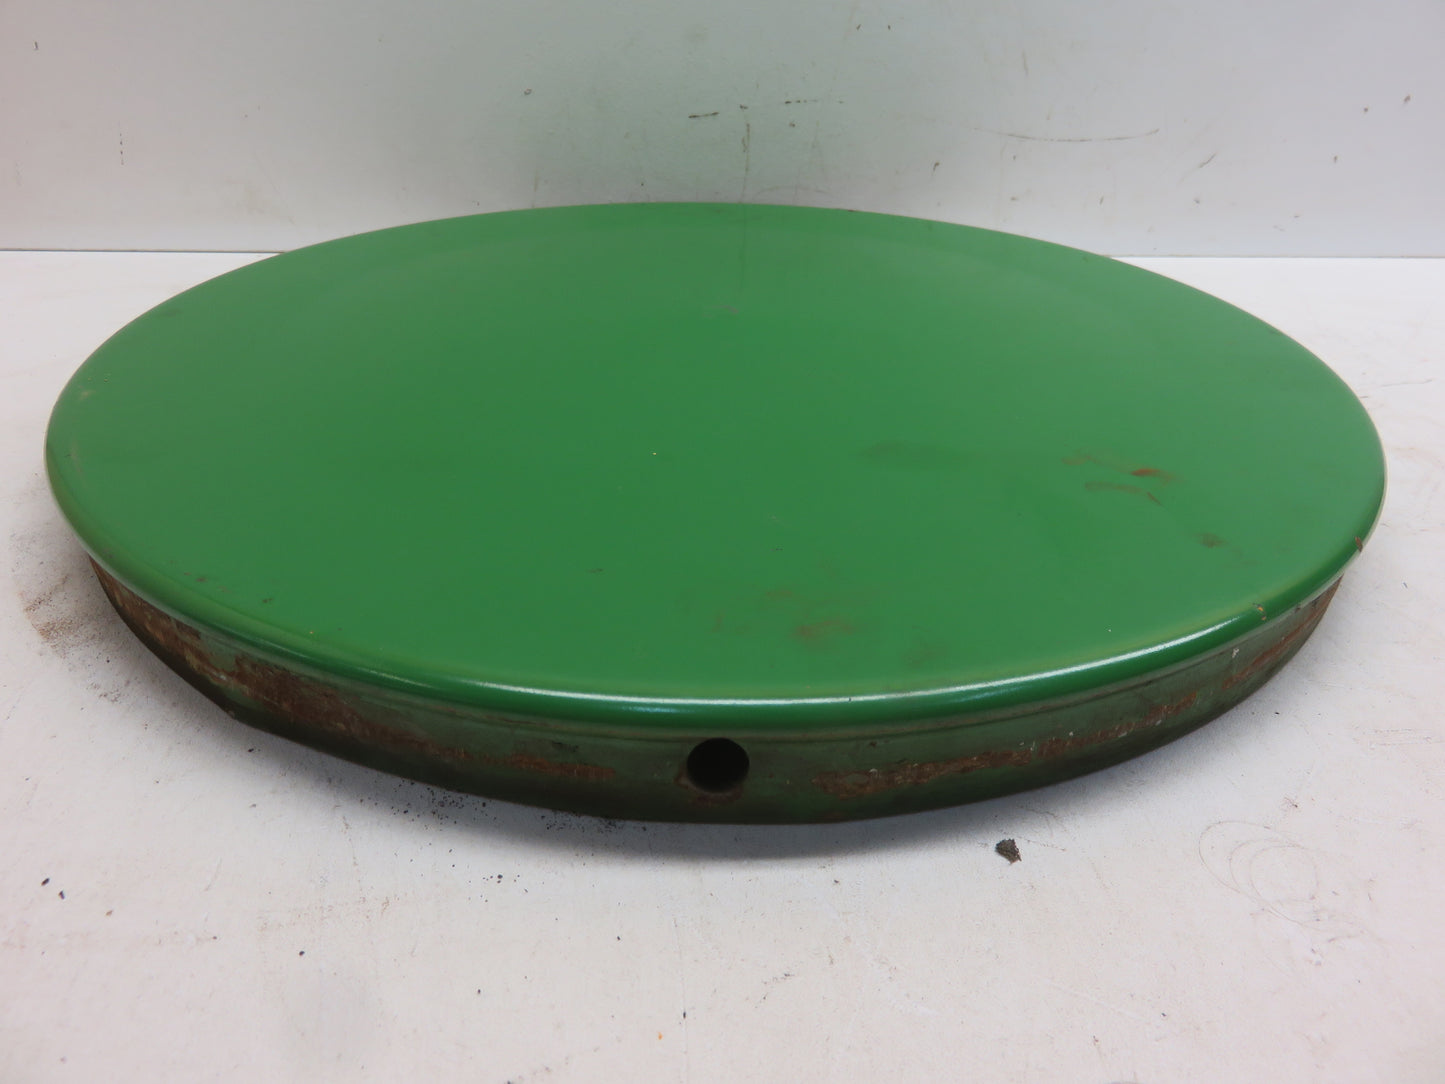 F821R John Deere Clutch Pulley Cover For A, AO, AR, G, 60, 70, 620, 720, 630, 730